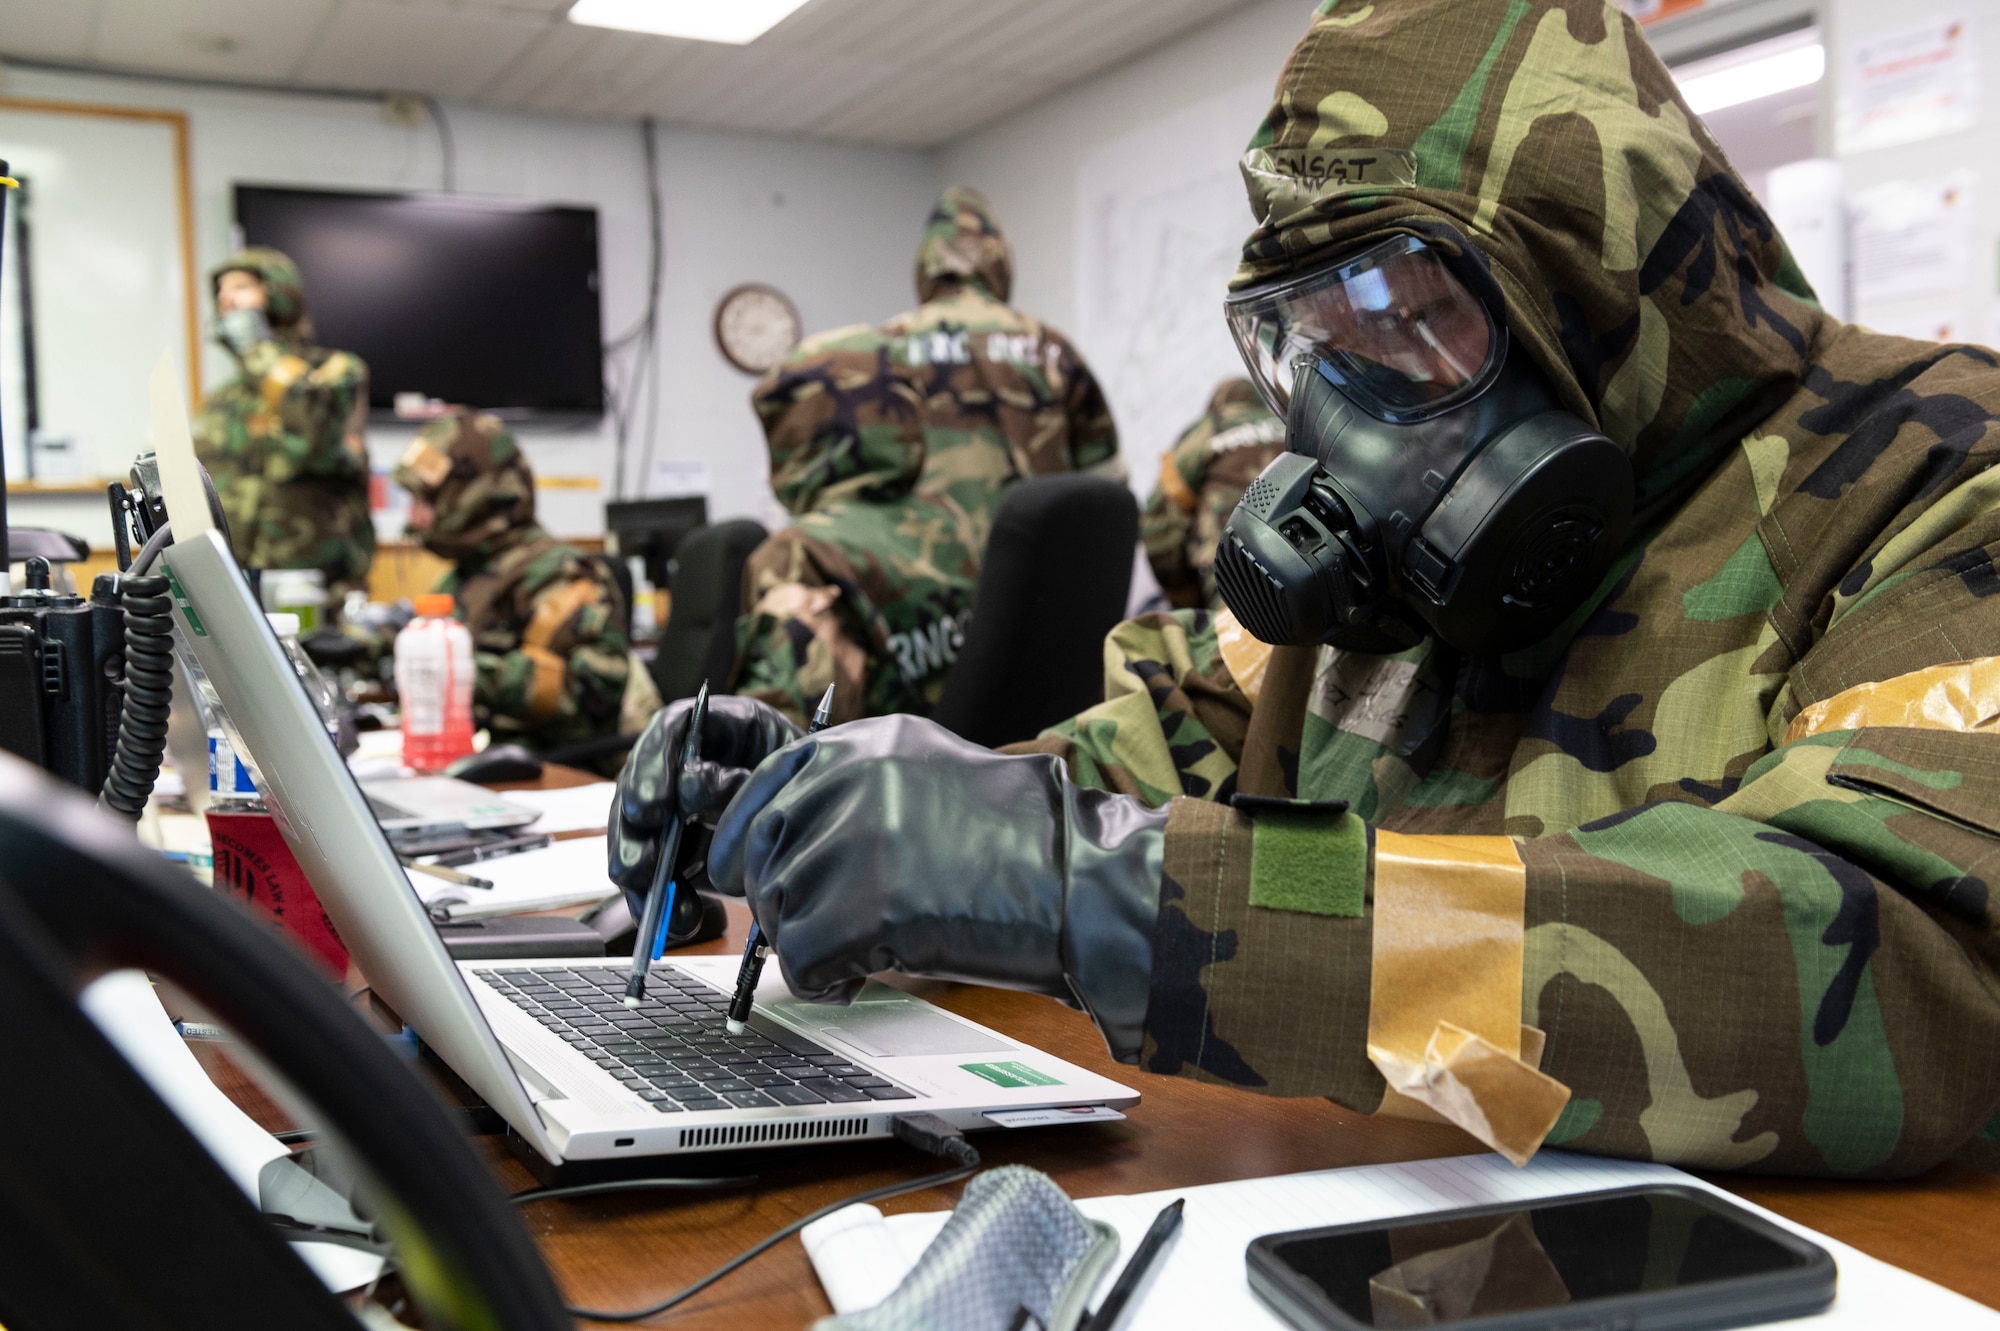 U.S. Air Force Senior Master Sgt. Dave Twigg, 167th Operations Group, maintains operations while wearing mission oriented protective gear in the emergency operation center during a readiness exercise for the 167th Airlift Wing at Shepherd Field, Martinsburg, West Virginia, Aug. 10, 2023. The exercise tested the unit’s ability to mobilize, operate and sustain its mission in degraded and contested environments through a variety of scenarios.